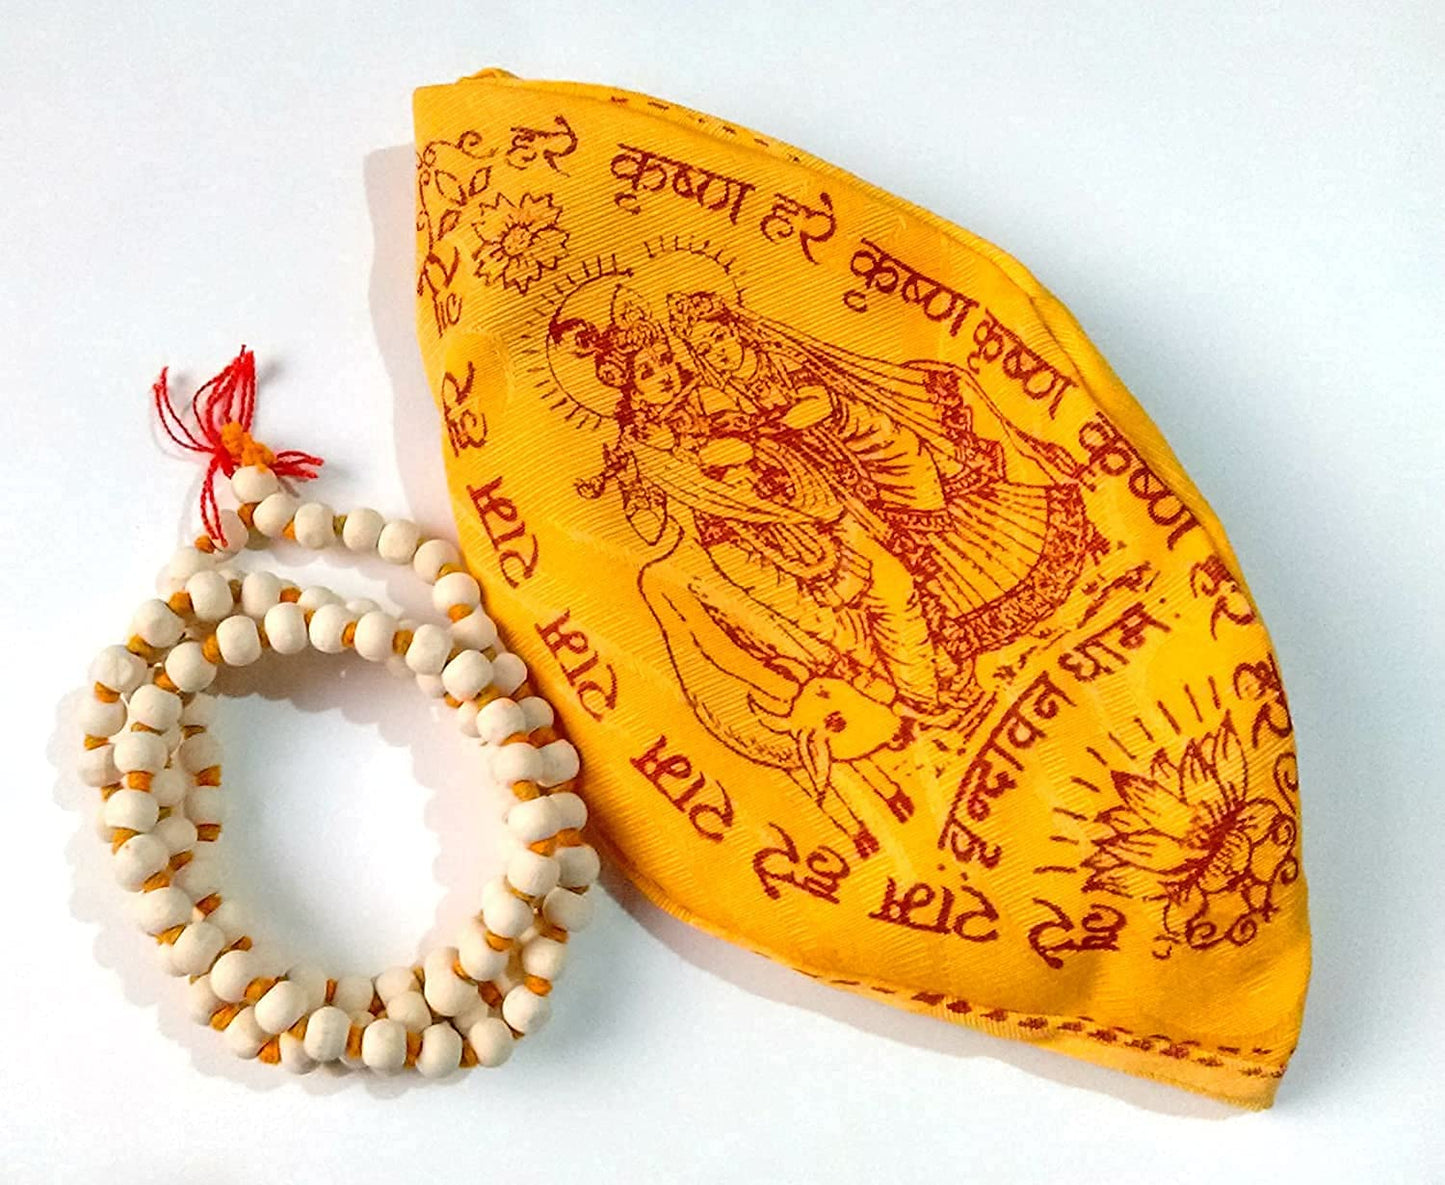 Pujahome Natural Tulsi Mala 108+1 Beads (6mm) with Cotton Gomukhi Japa Bag (Combo of 2)